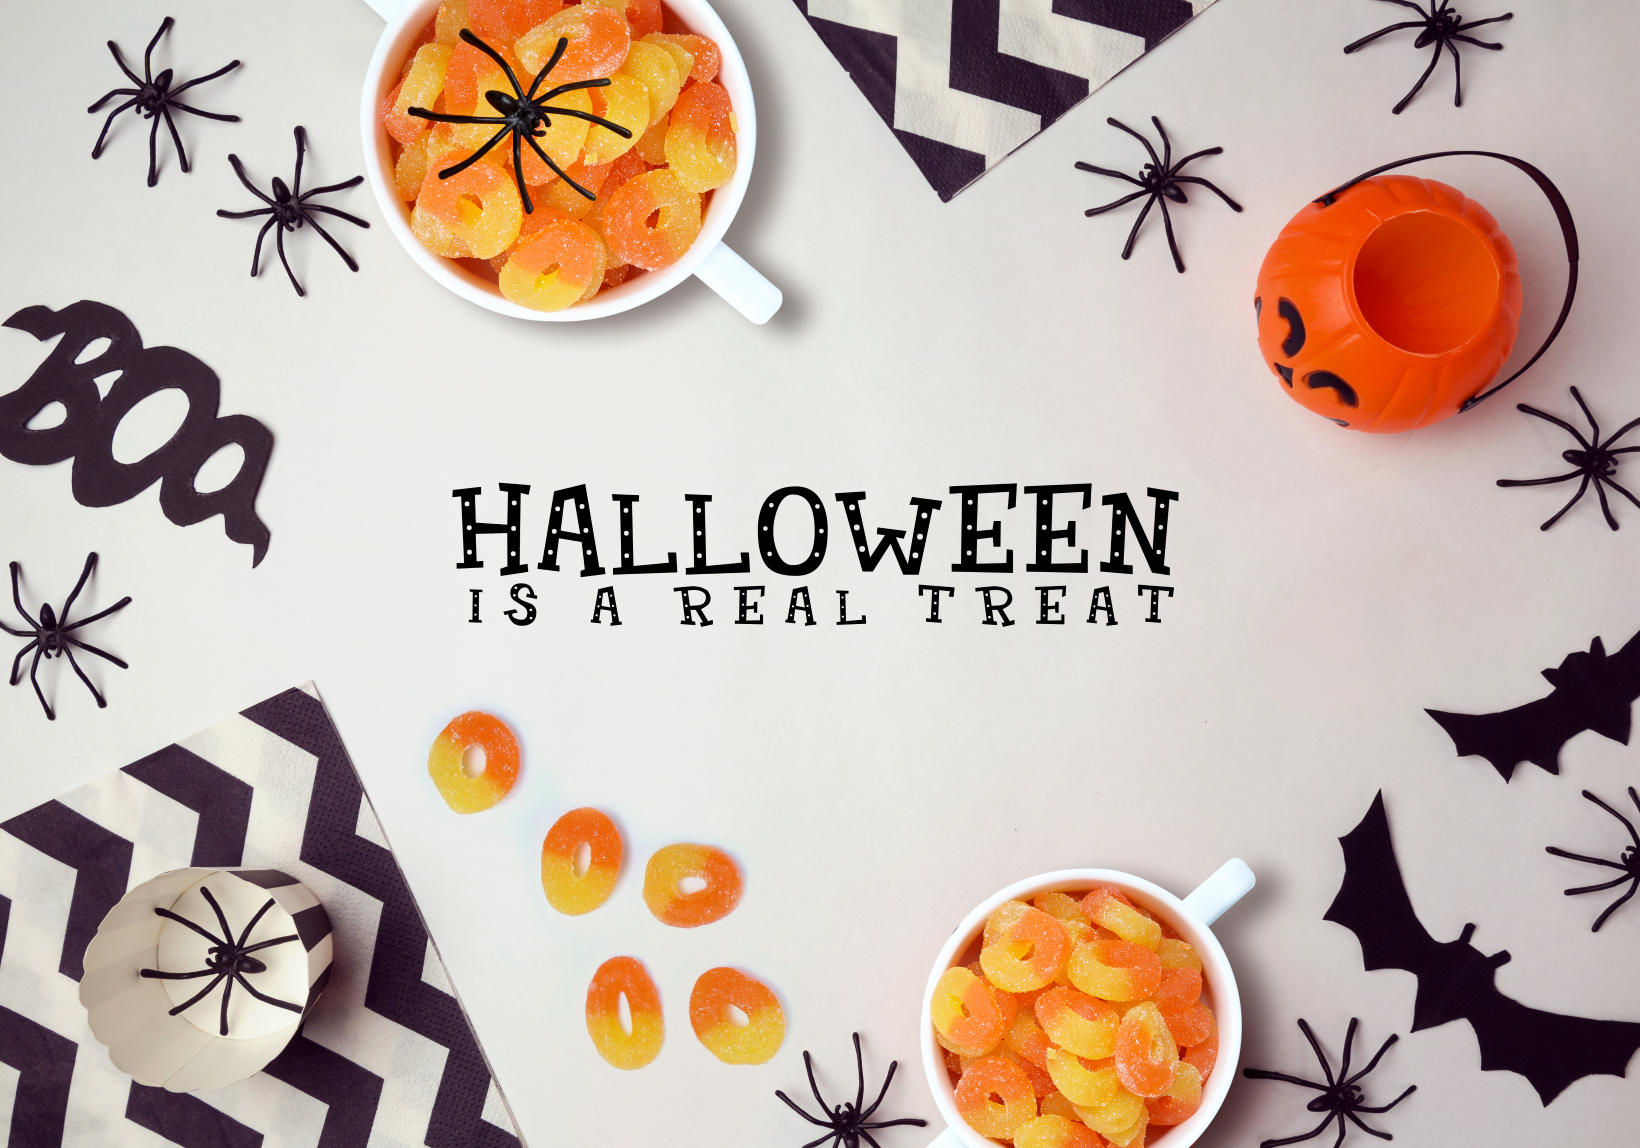 Trick or Treat this Halloween with Amazing Range of Candy and Chocolates